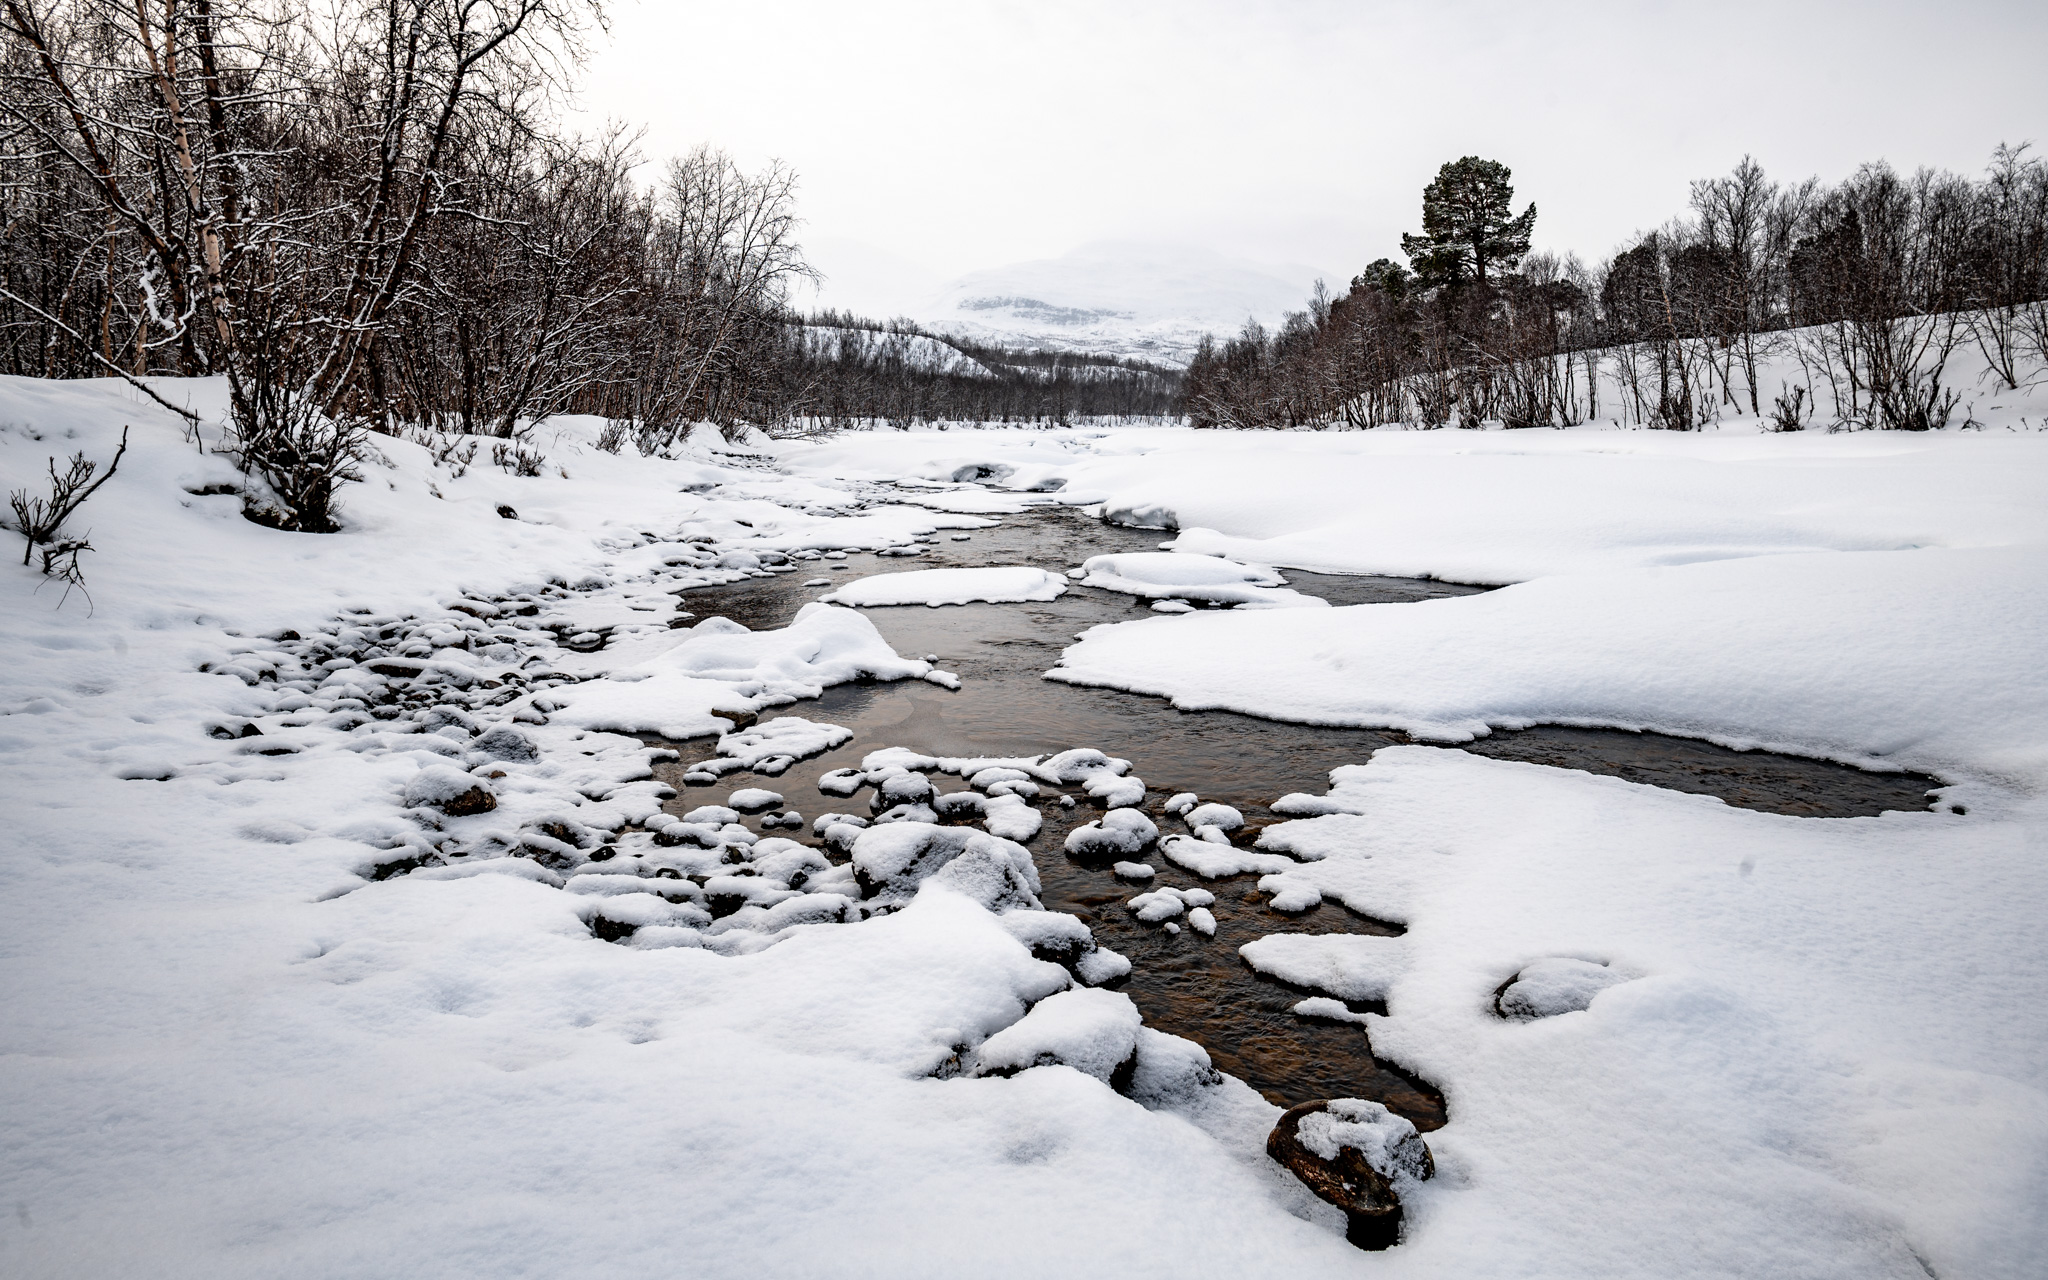 Abisko National Park and its frozen river covered by snow